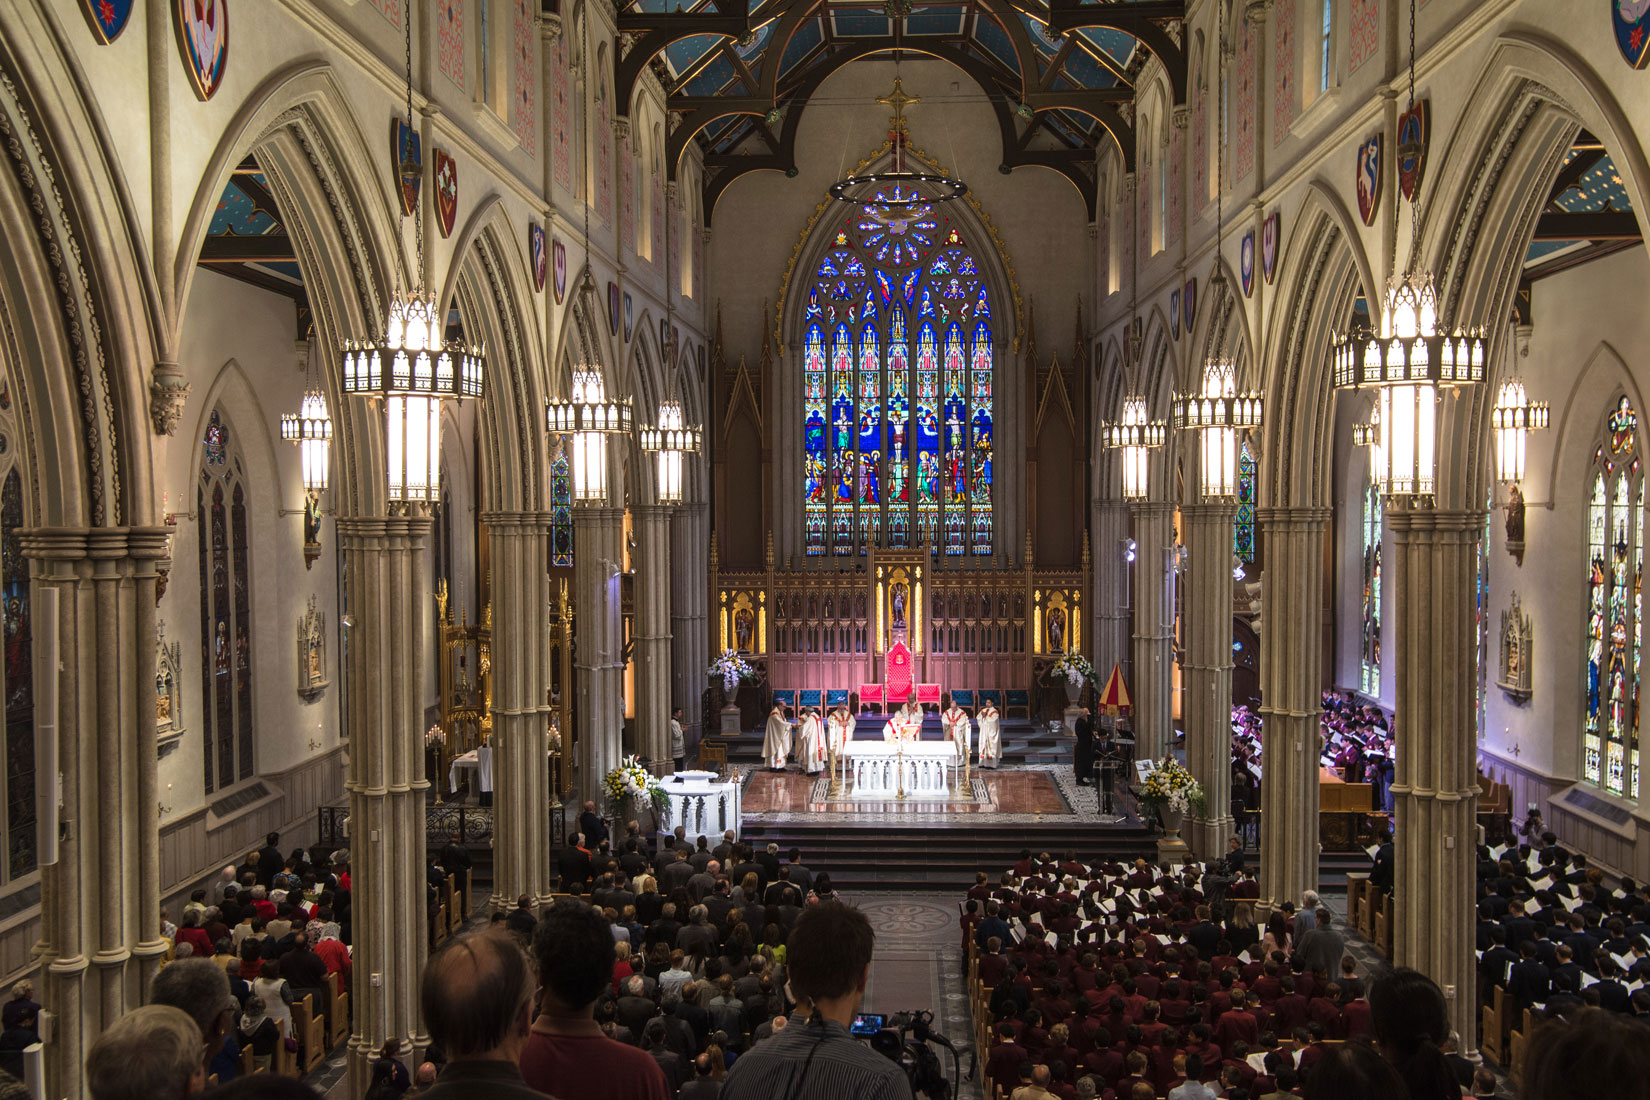 The workers' thanksgiving Mass at St. Michael's Cathedral, Sept. 30. (Photo by Michael Swan)